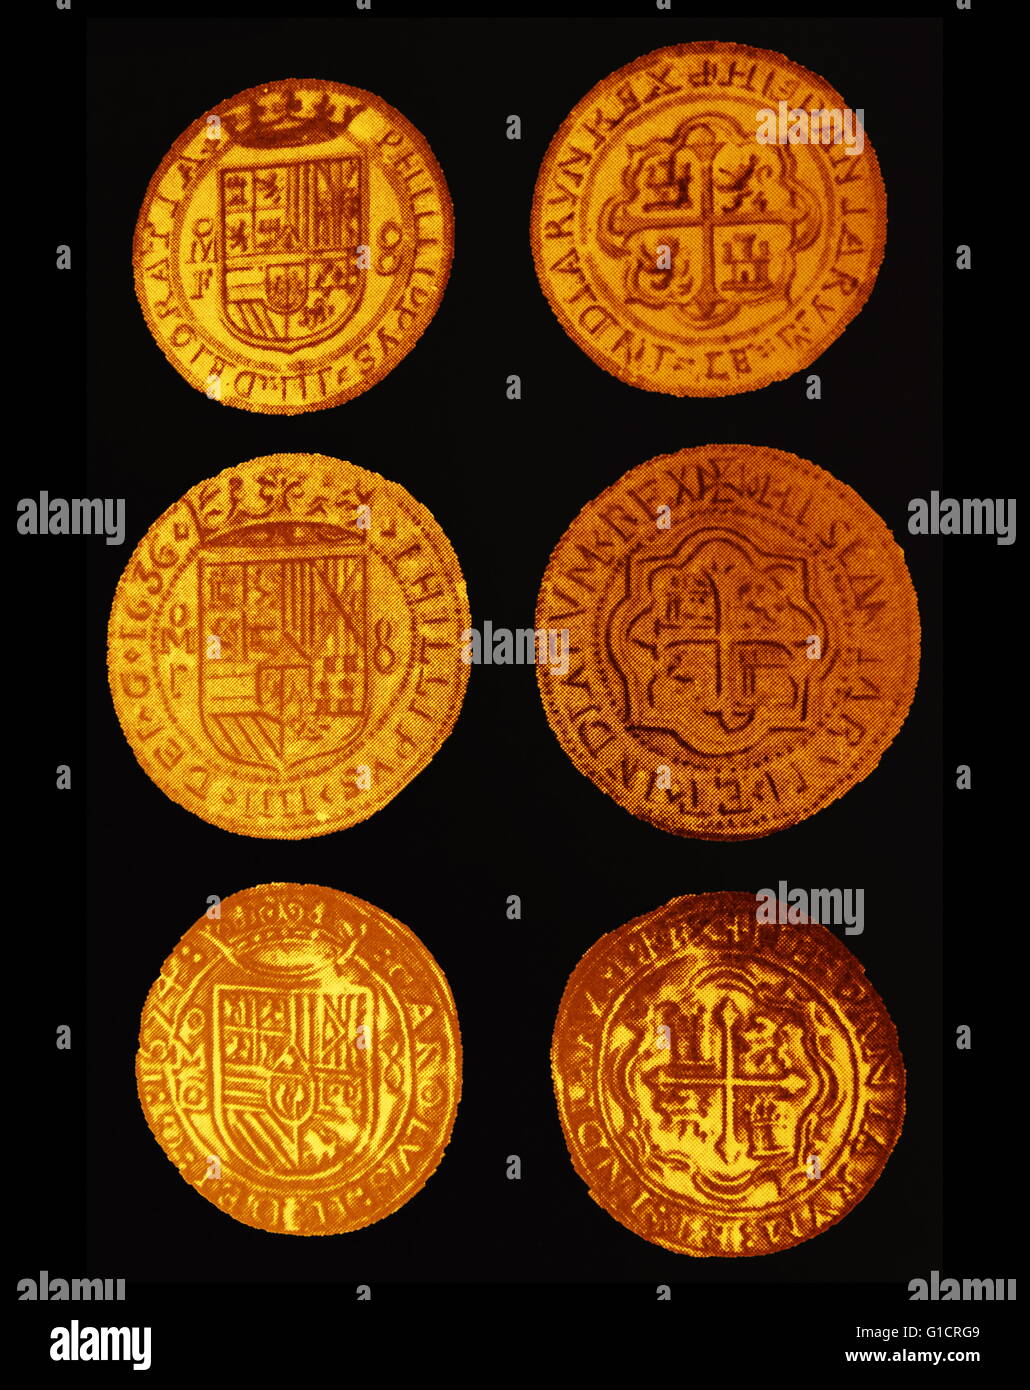 Coins used by the Spanish colonial government in Mexico 18th century Stock Photo